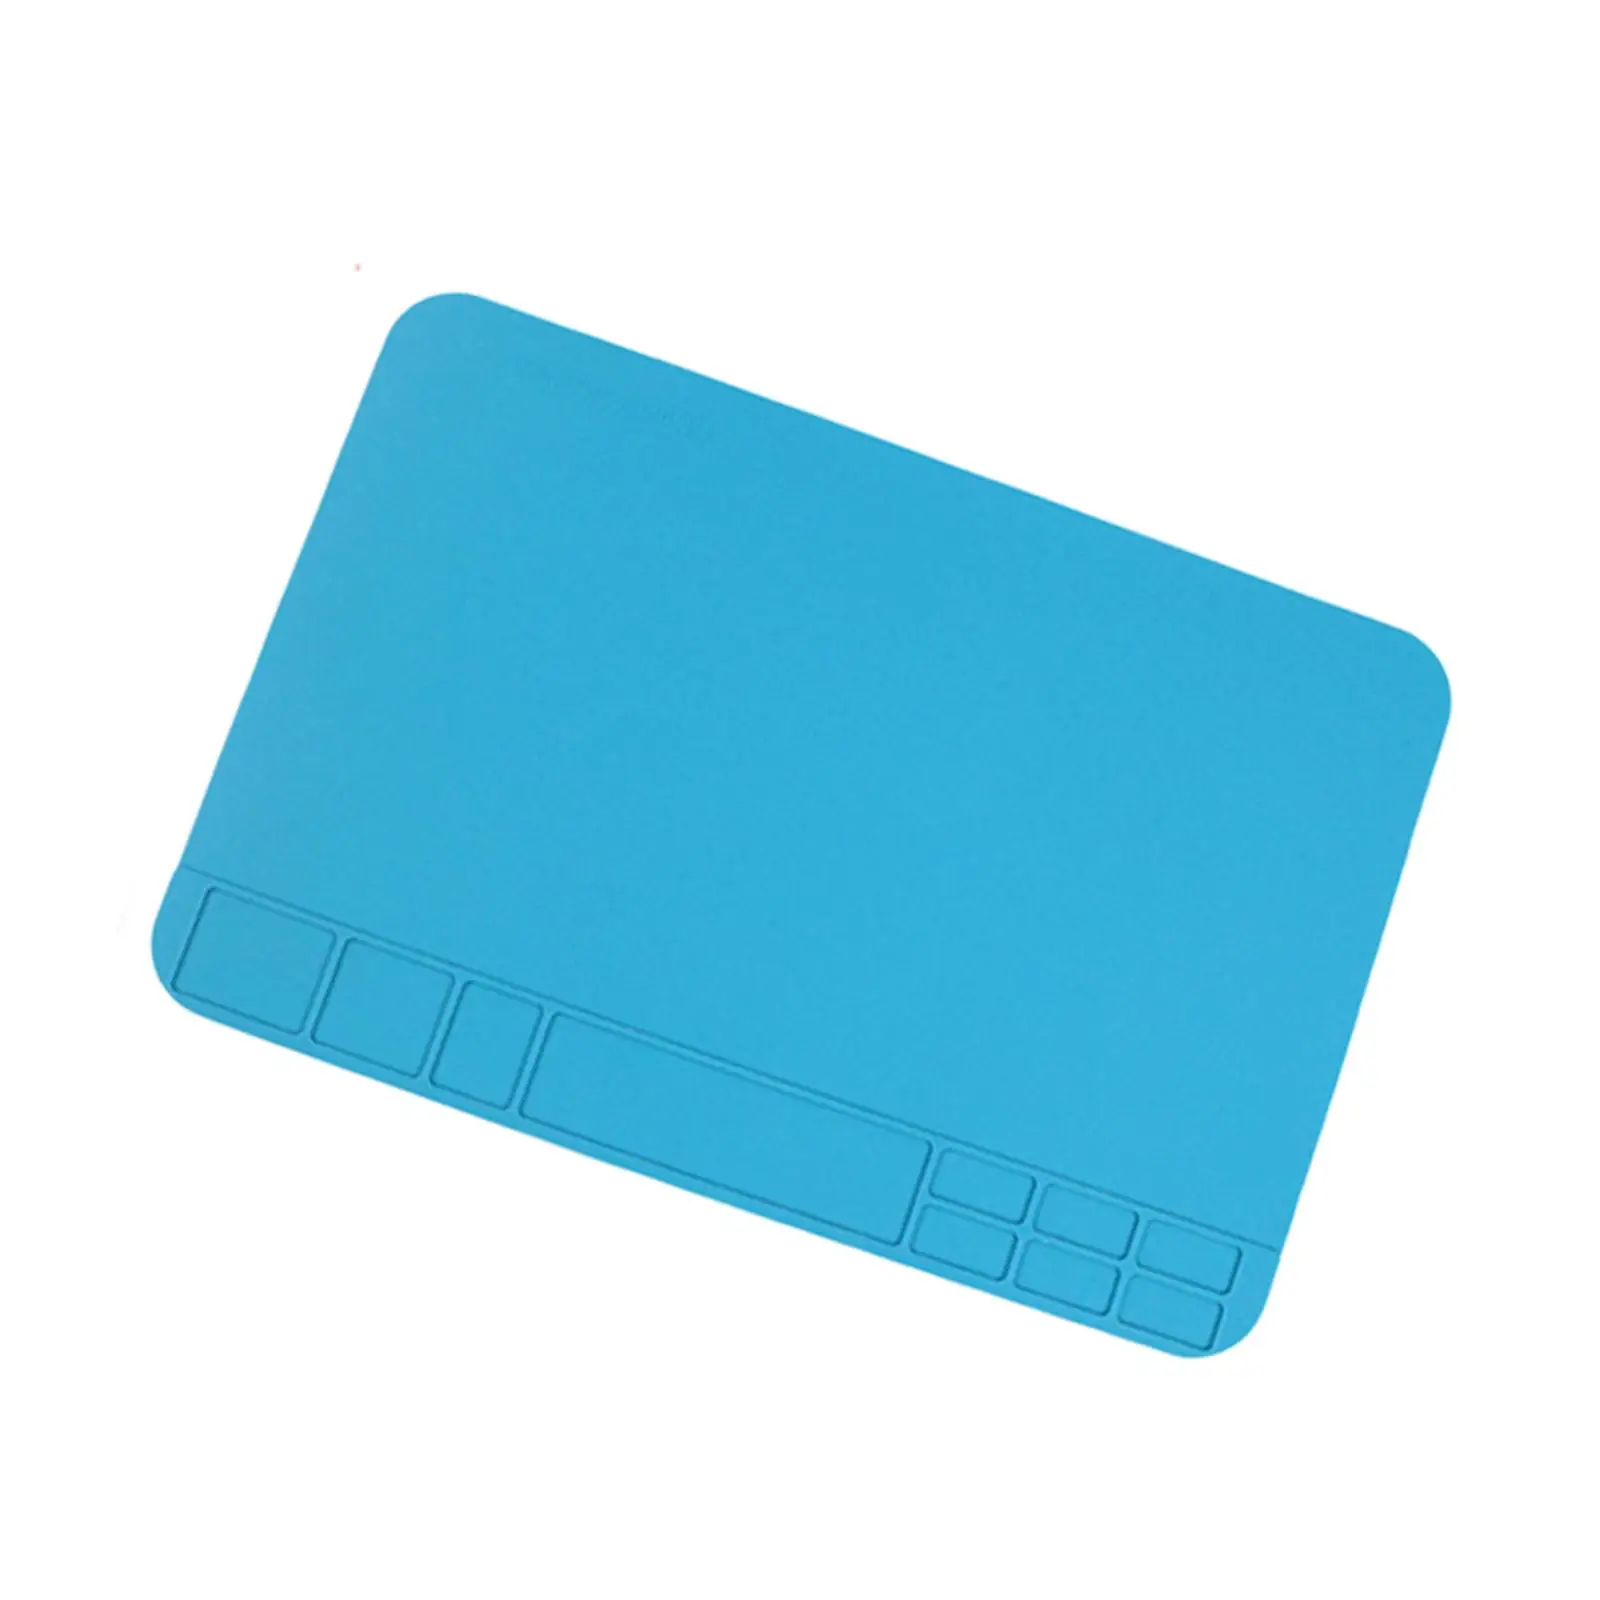 Heat Insulation Solder Mat Solder Pad Platform Repair Pad Thick Large Silicone Solder Work Station Mat for Laptop Watch Phone